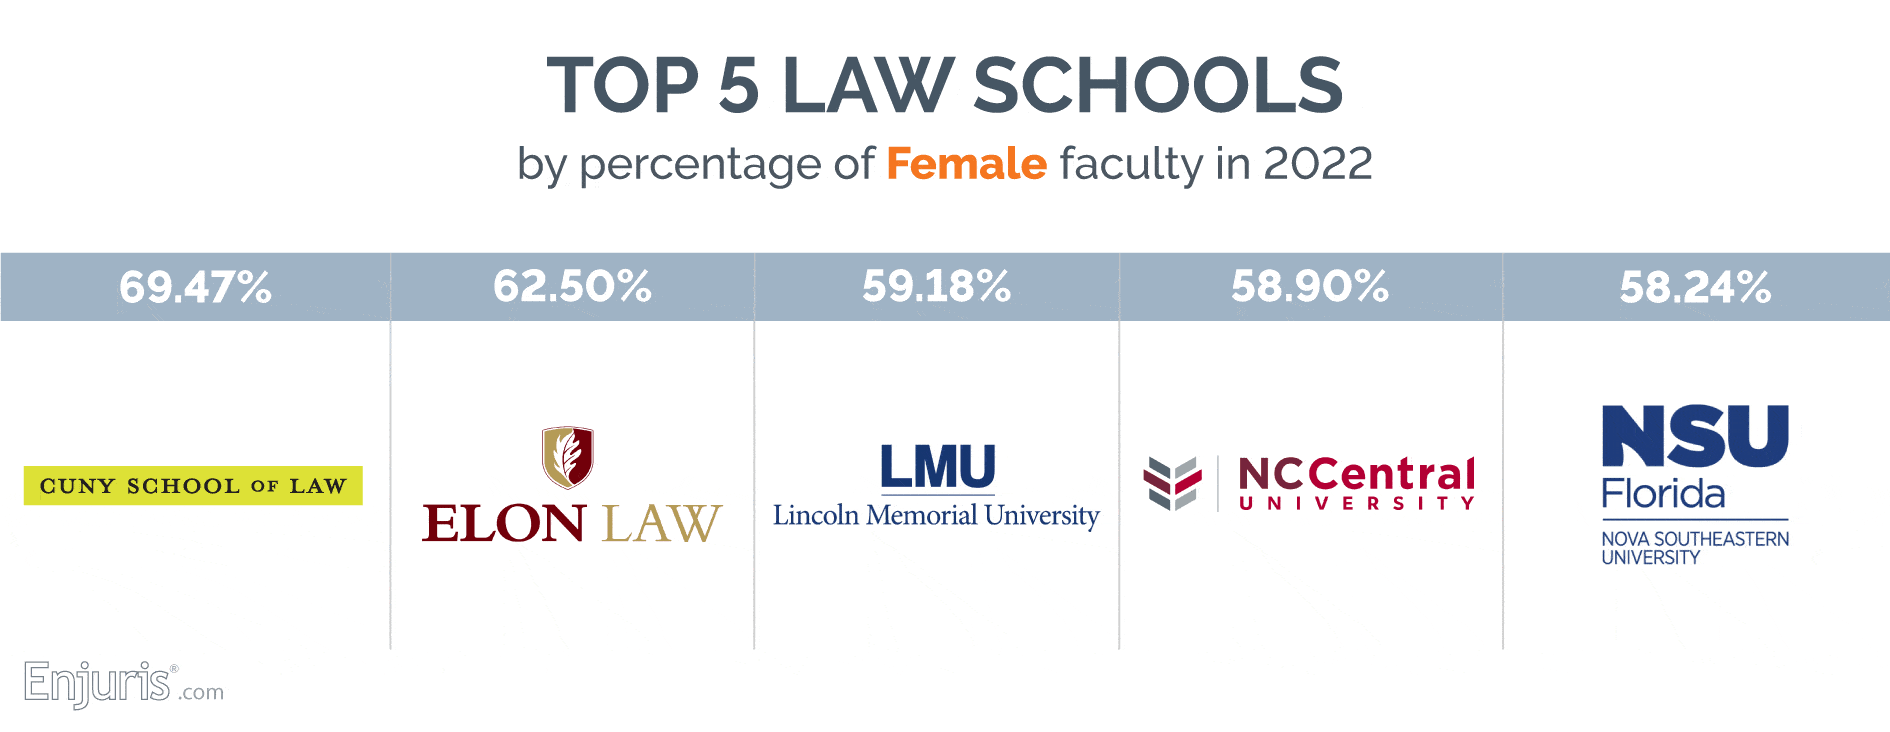 Top 5 law schools by percentage of female faculty in 2022